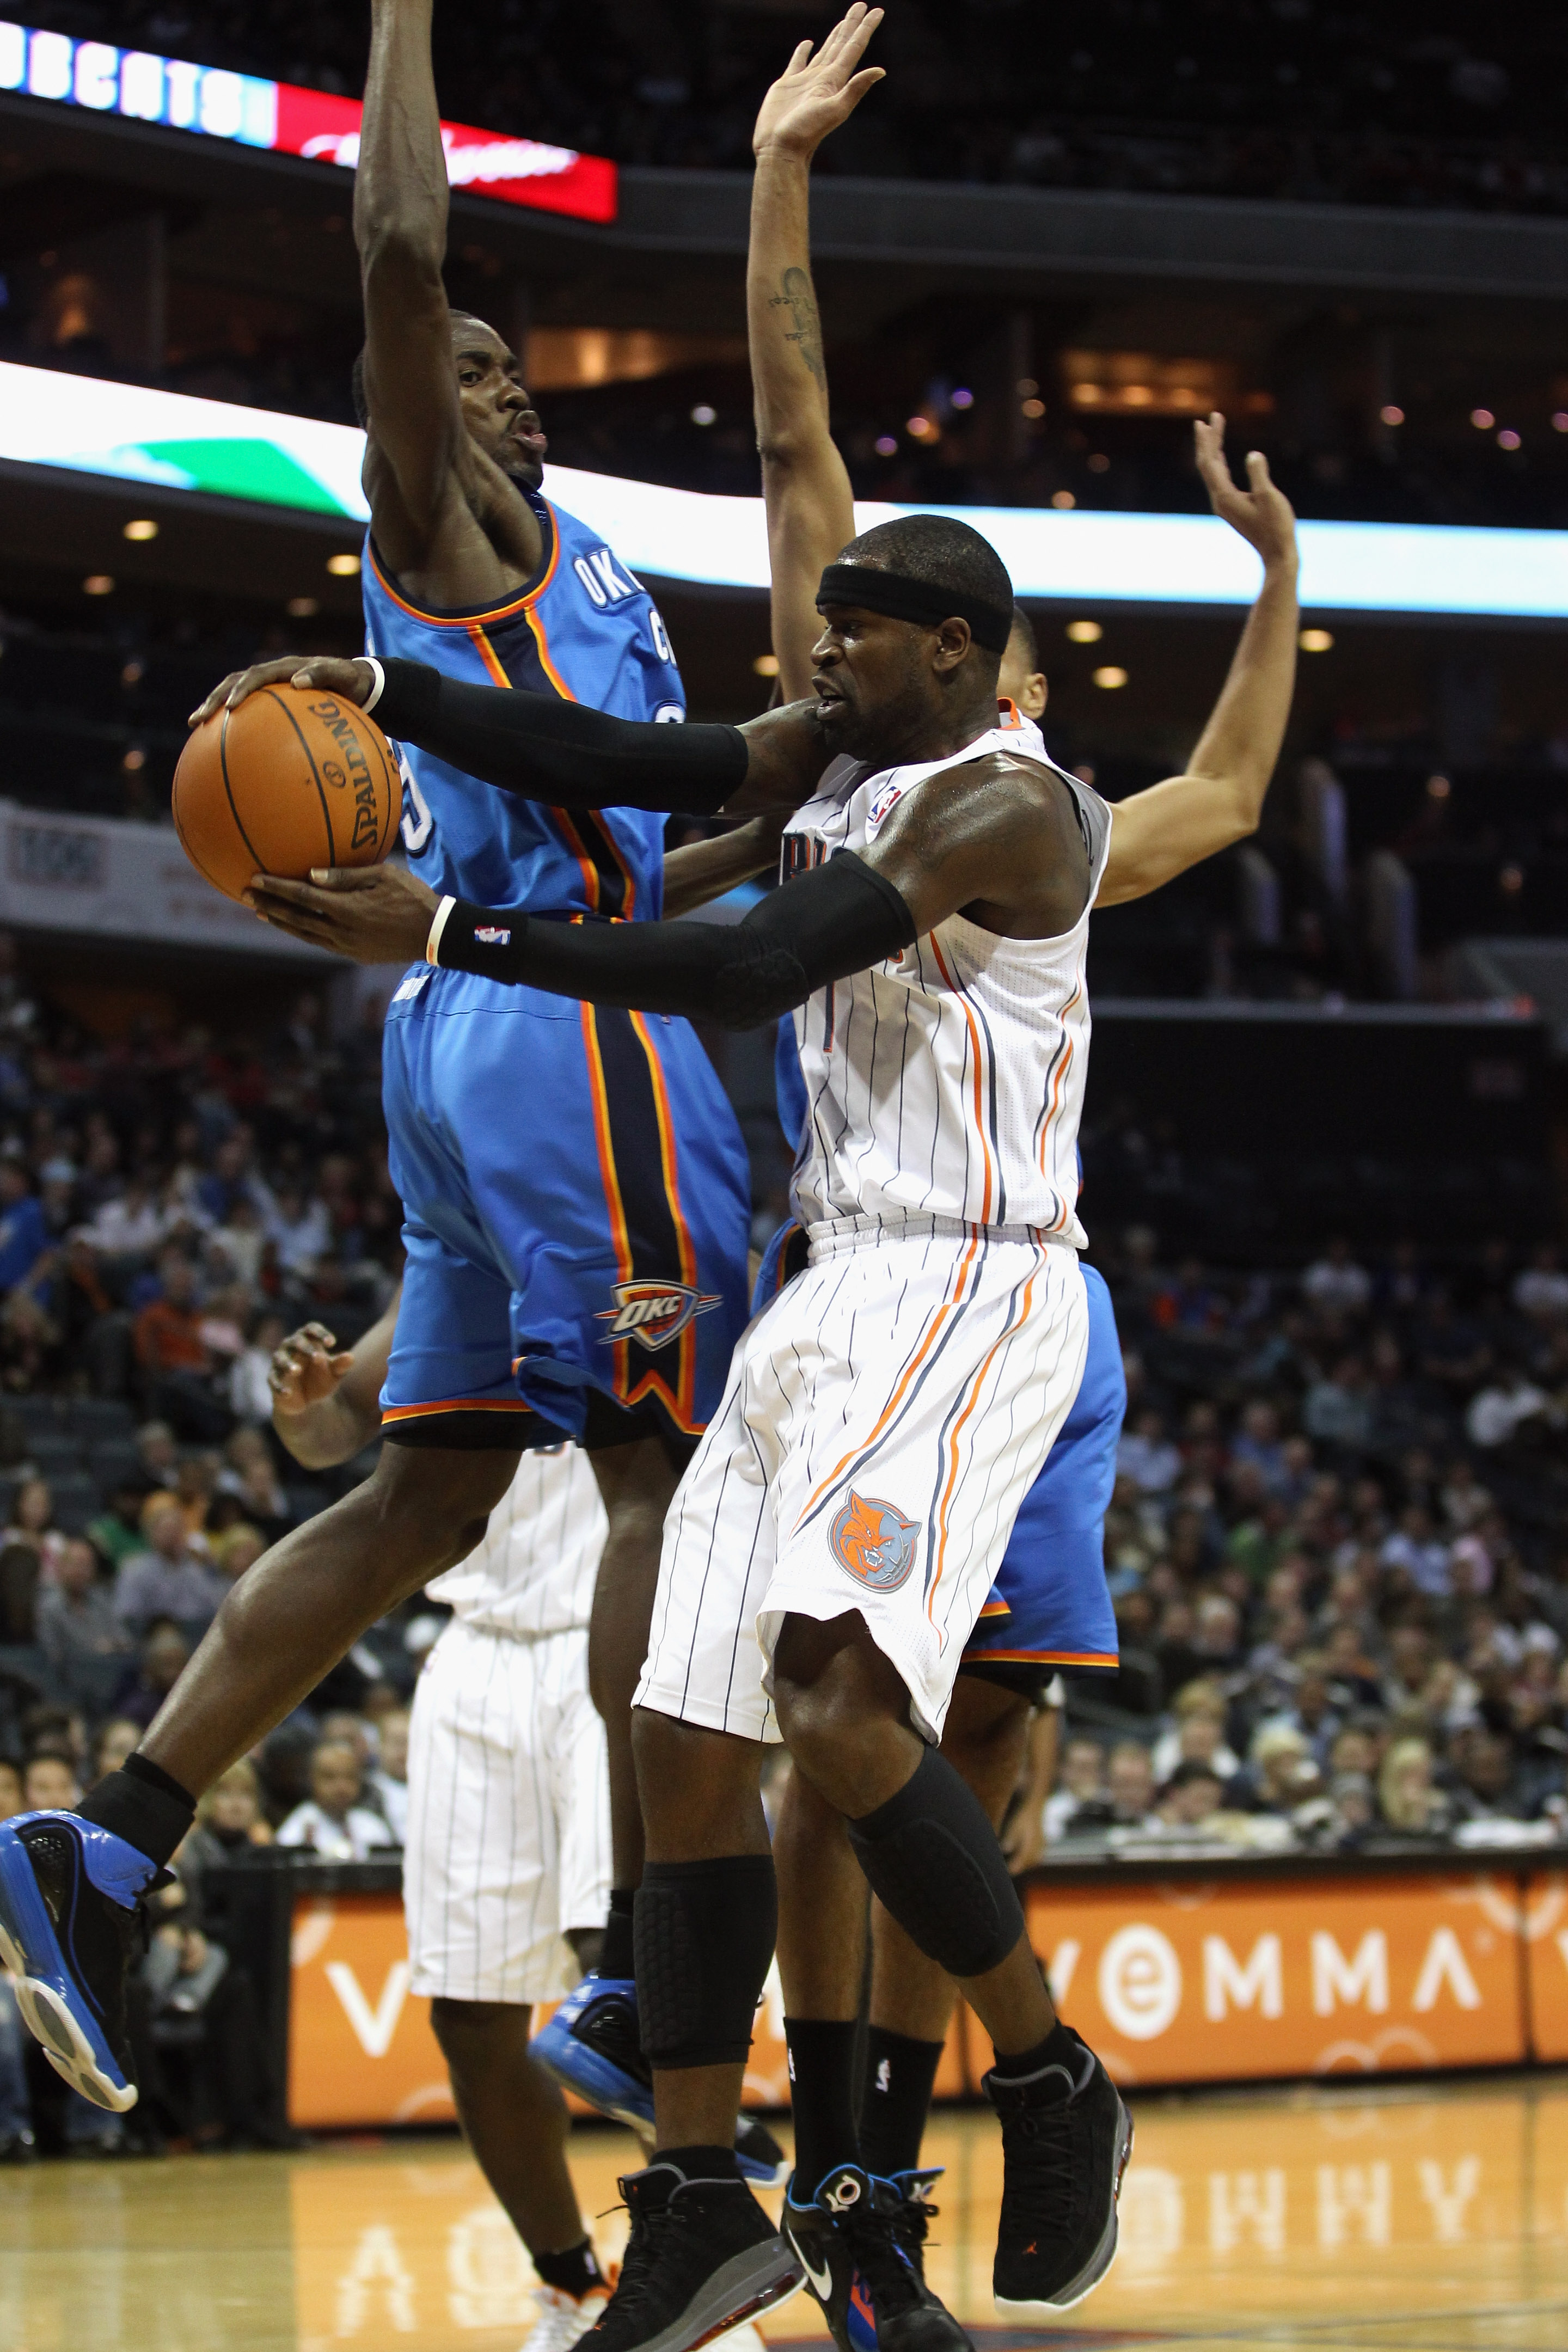 CHARLOTTE, NC - DECEMBER 21:  Stephen Jackson #1 of the Charlotte Bobcats makes a pass against the defense of the Oklahoma City Thunder during their game at Time Warner Cable Arena on December 21, 2010 in Charlotte, North Carolina. NOTE TO USER: User expr